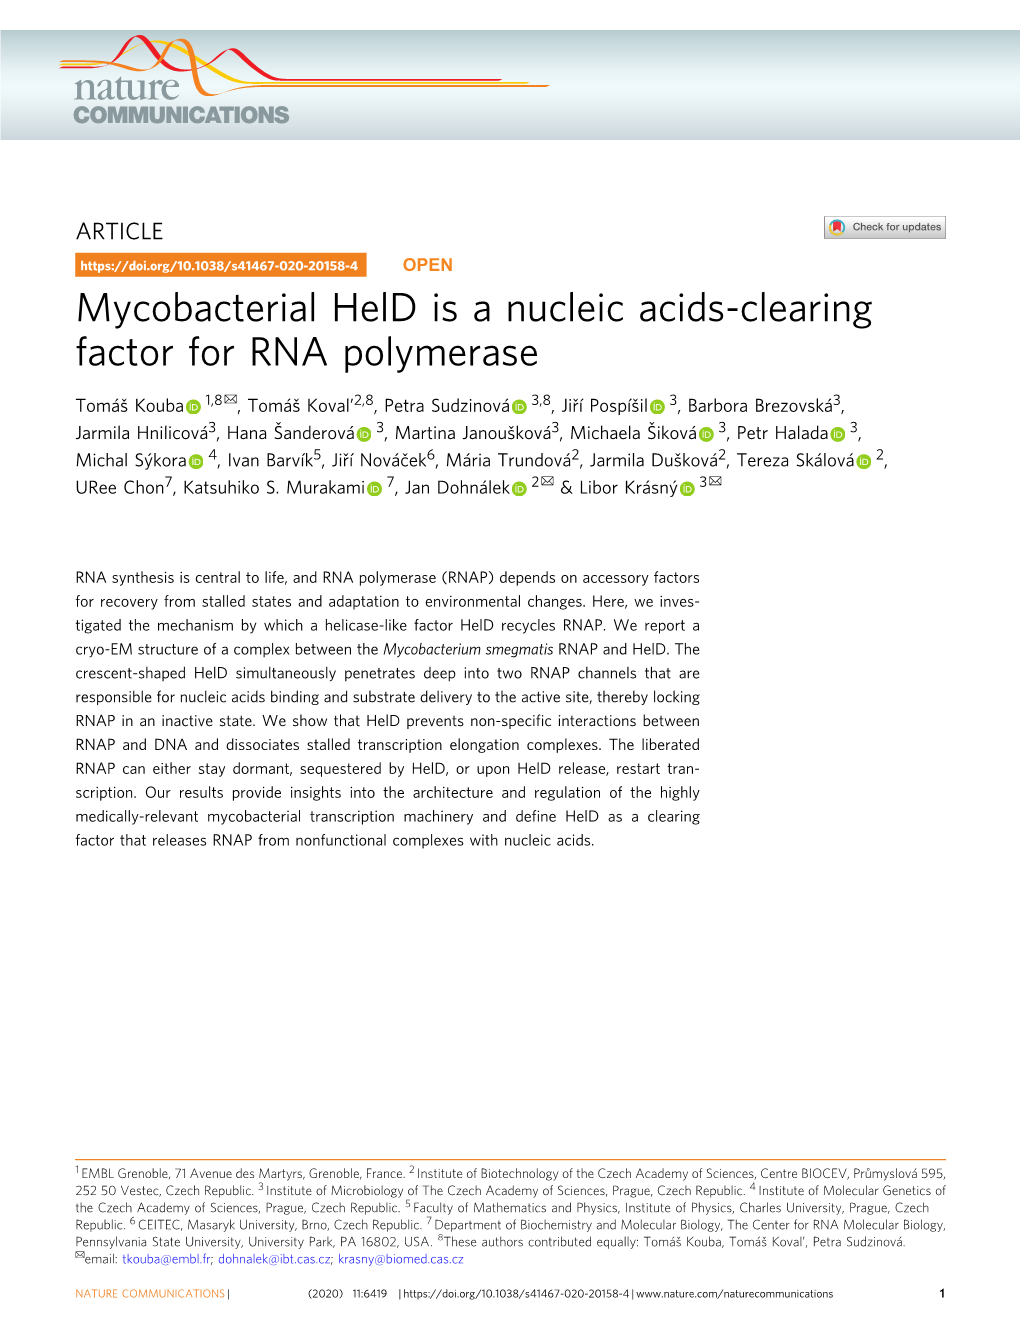 Mycobacterial Held Is a Nucleic Acids-Clearing Factor for RNA